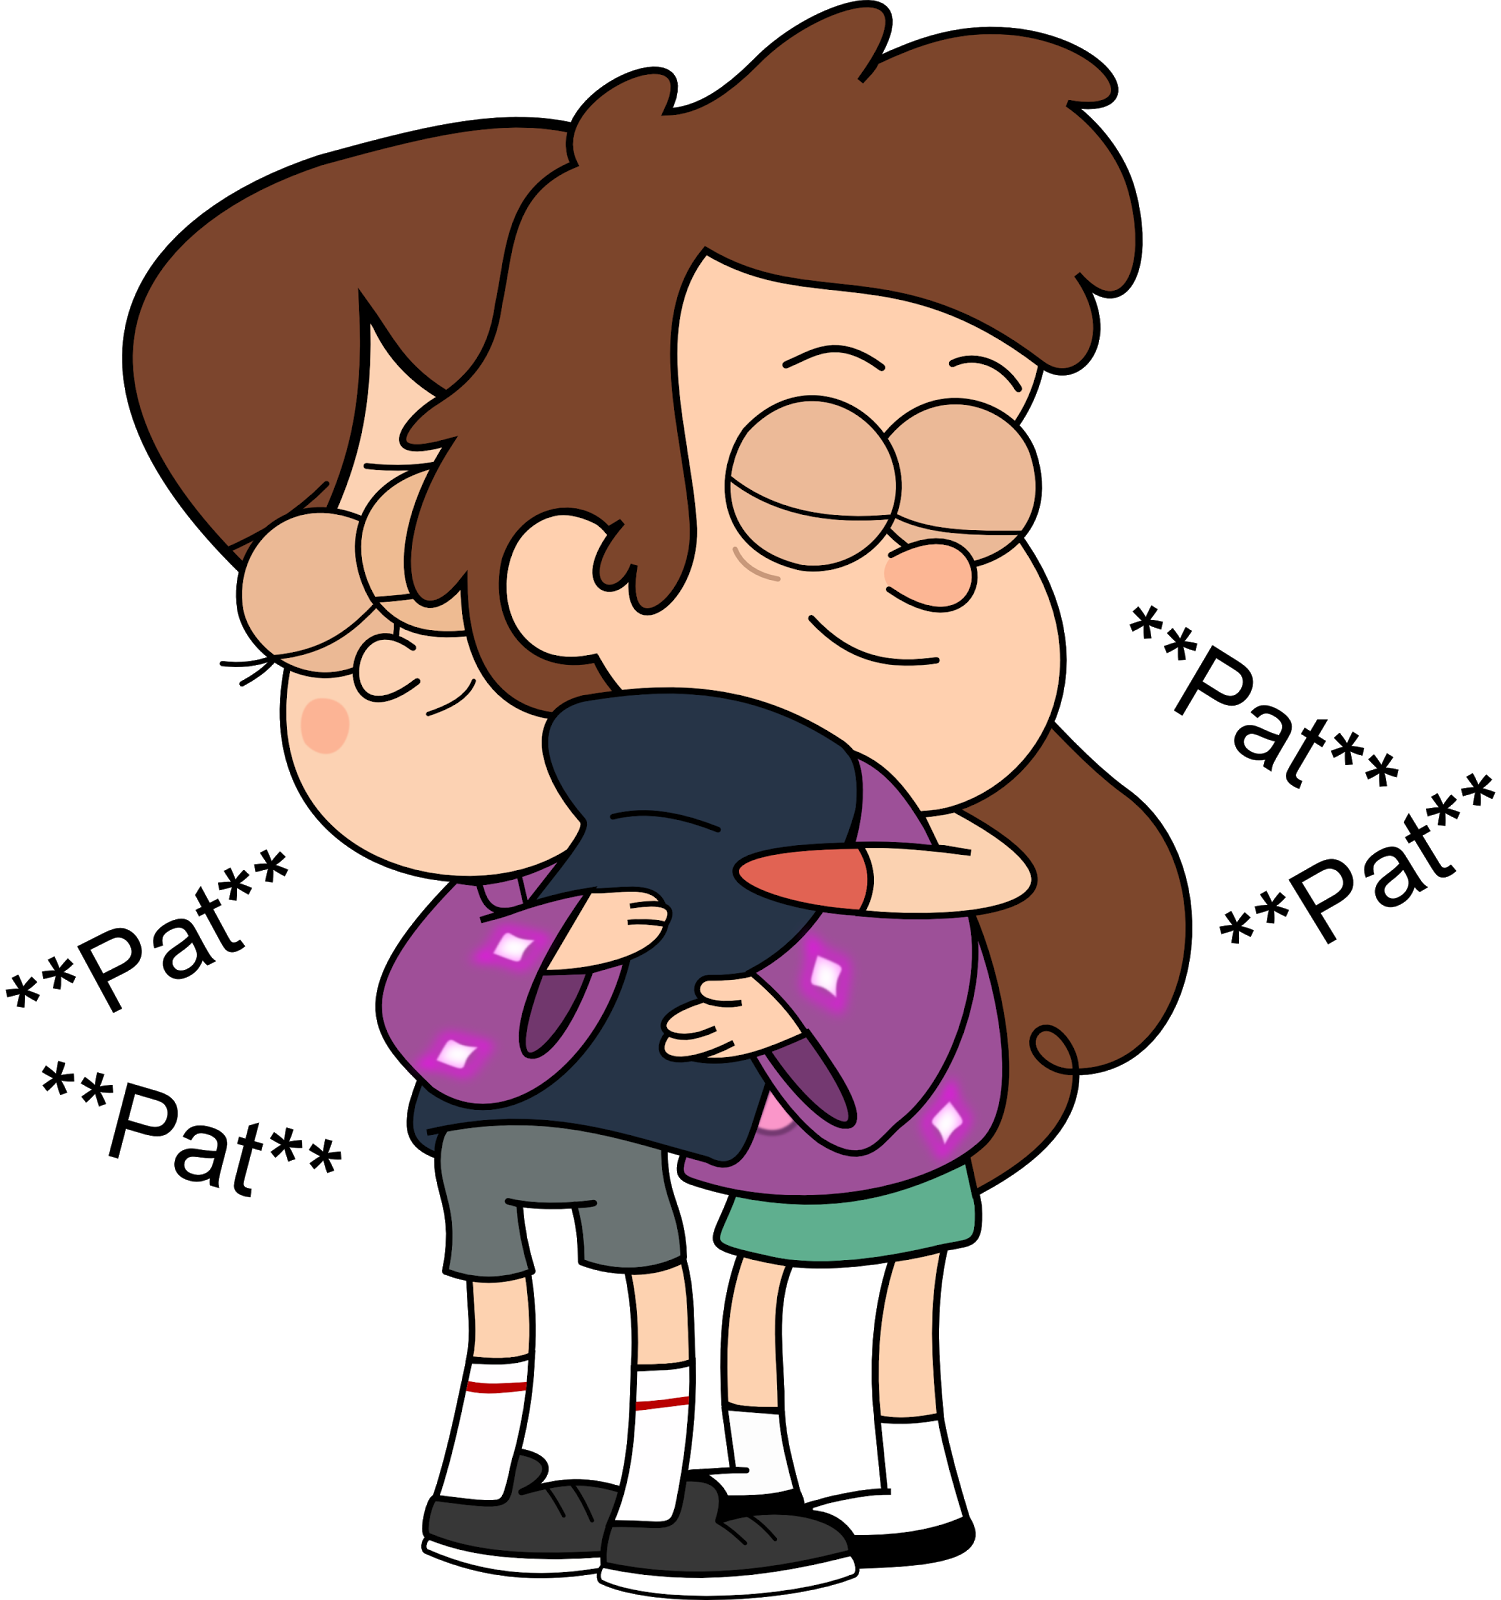 People hugging collection royalty. Free clipart teamwork